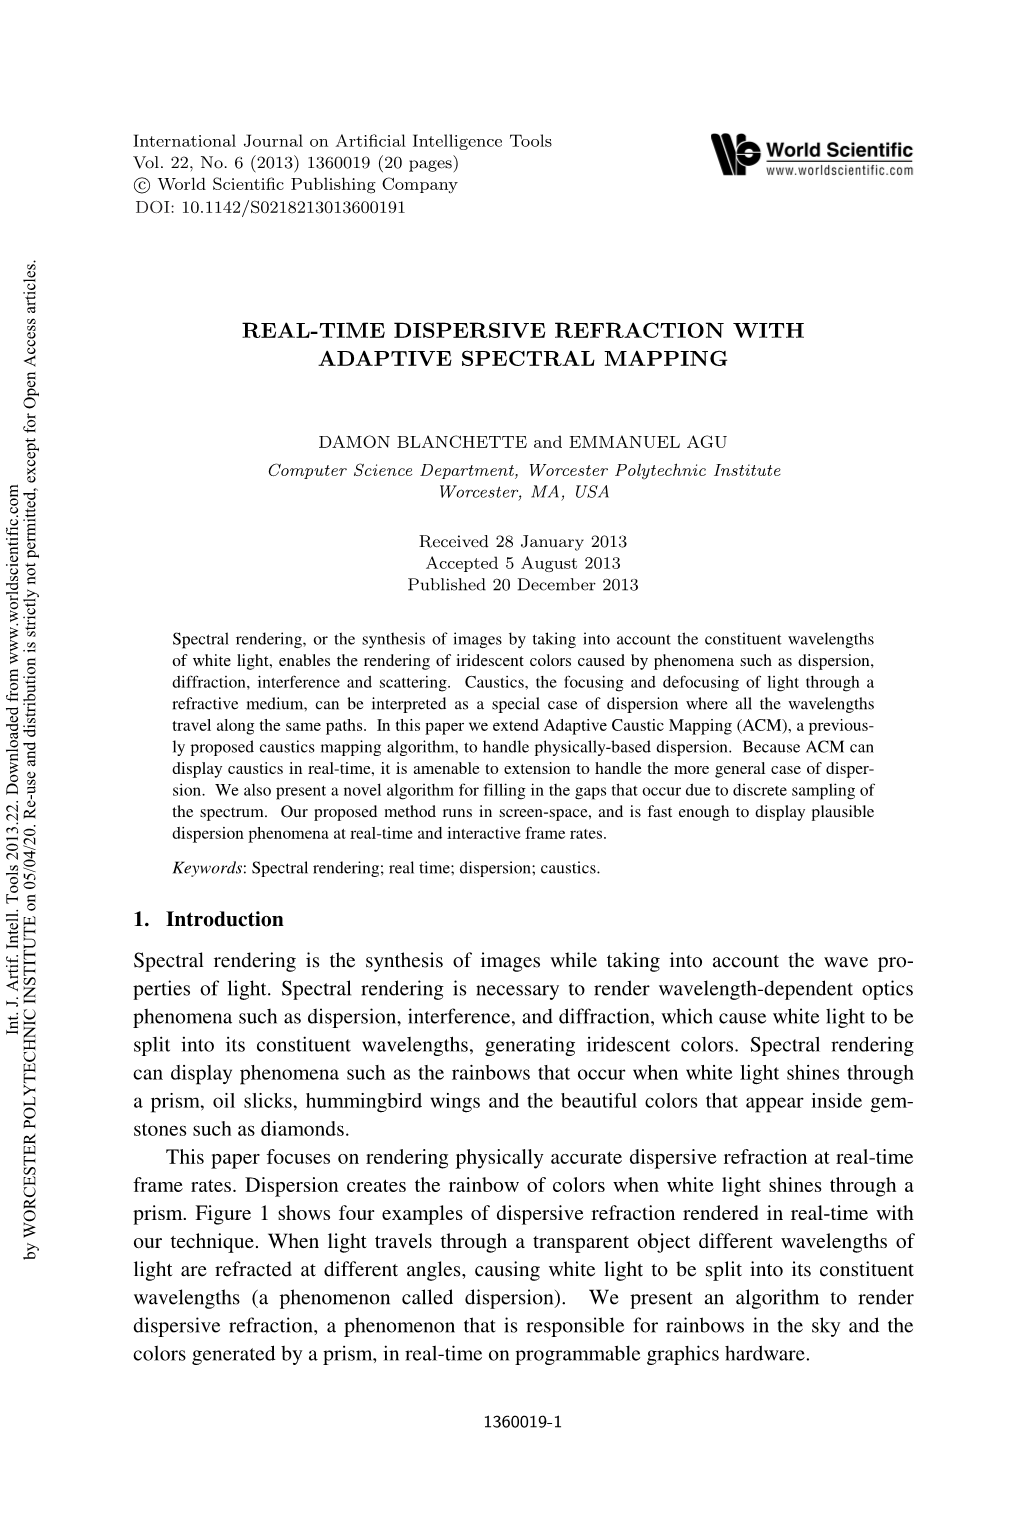 Real-Time Dispersive Refraction with Adaptive Spectral Mapping